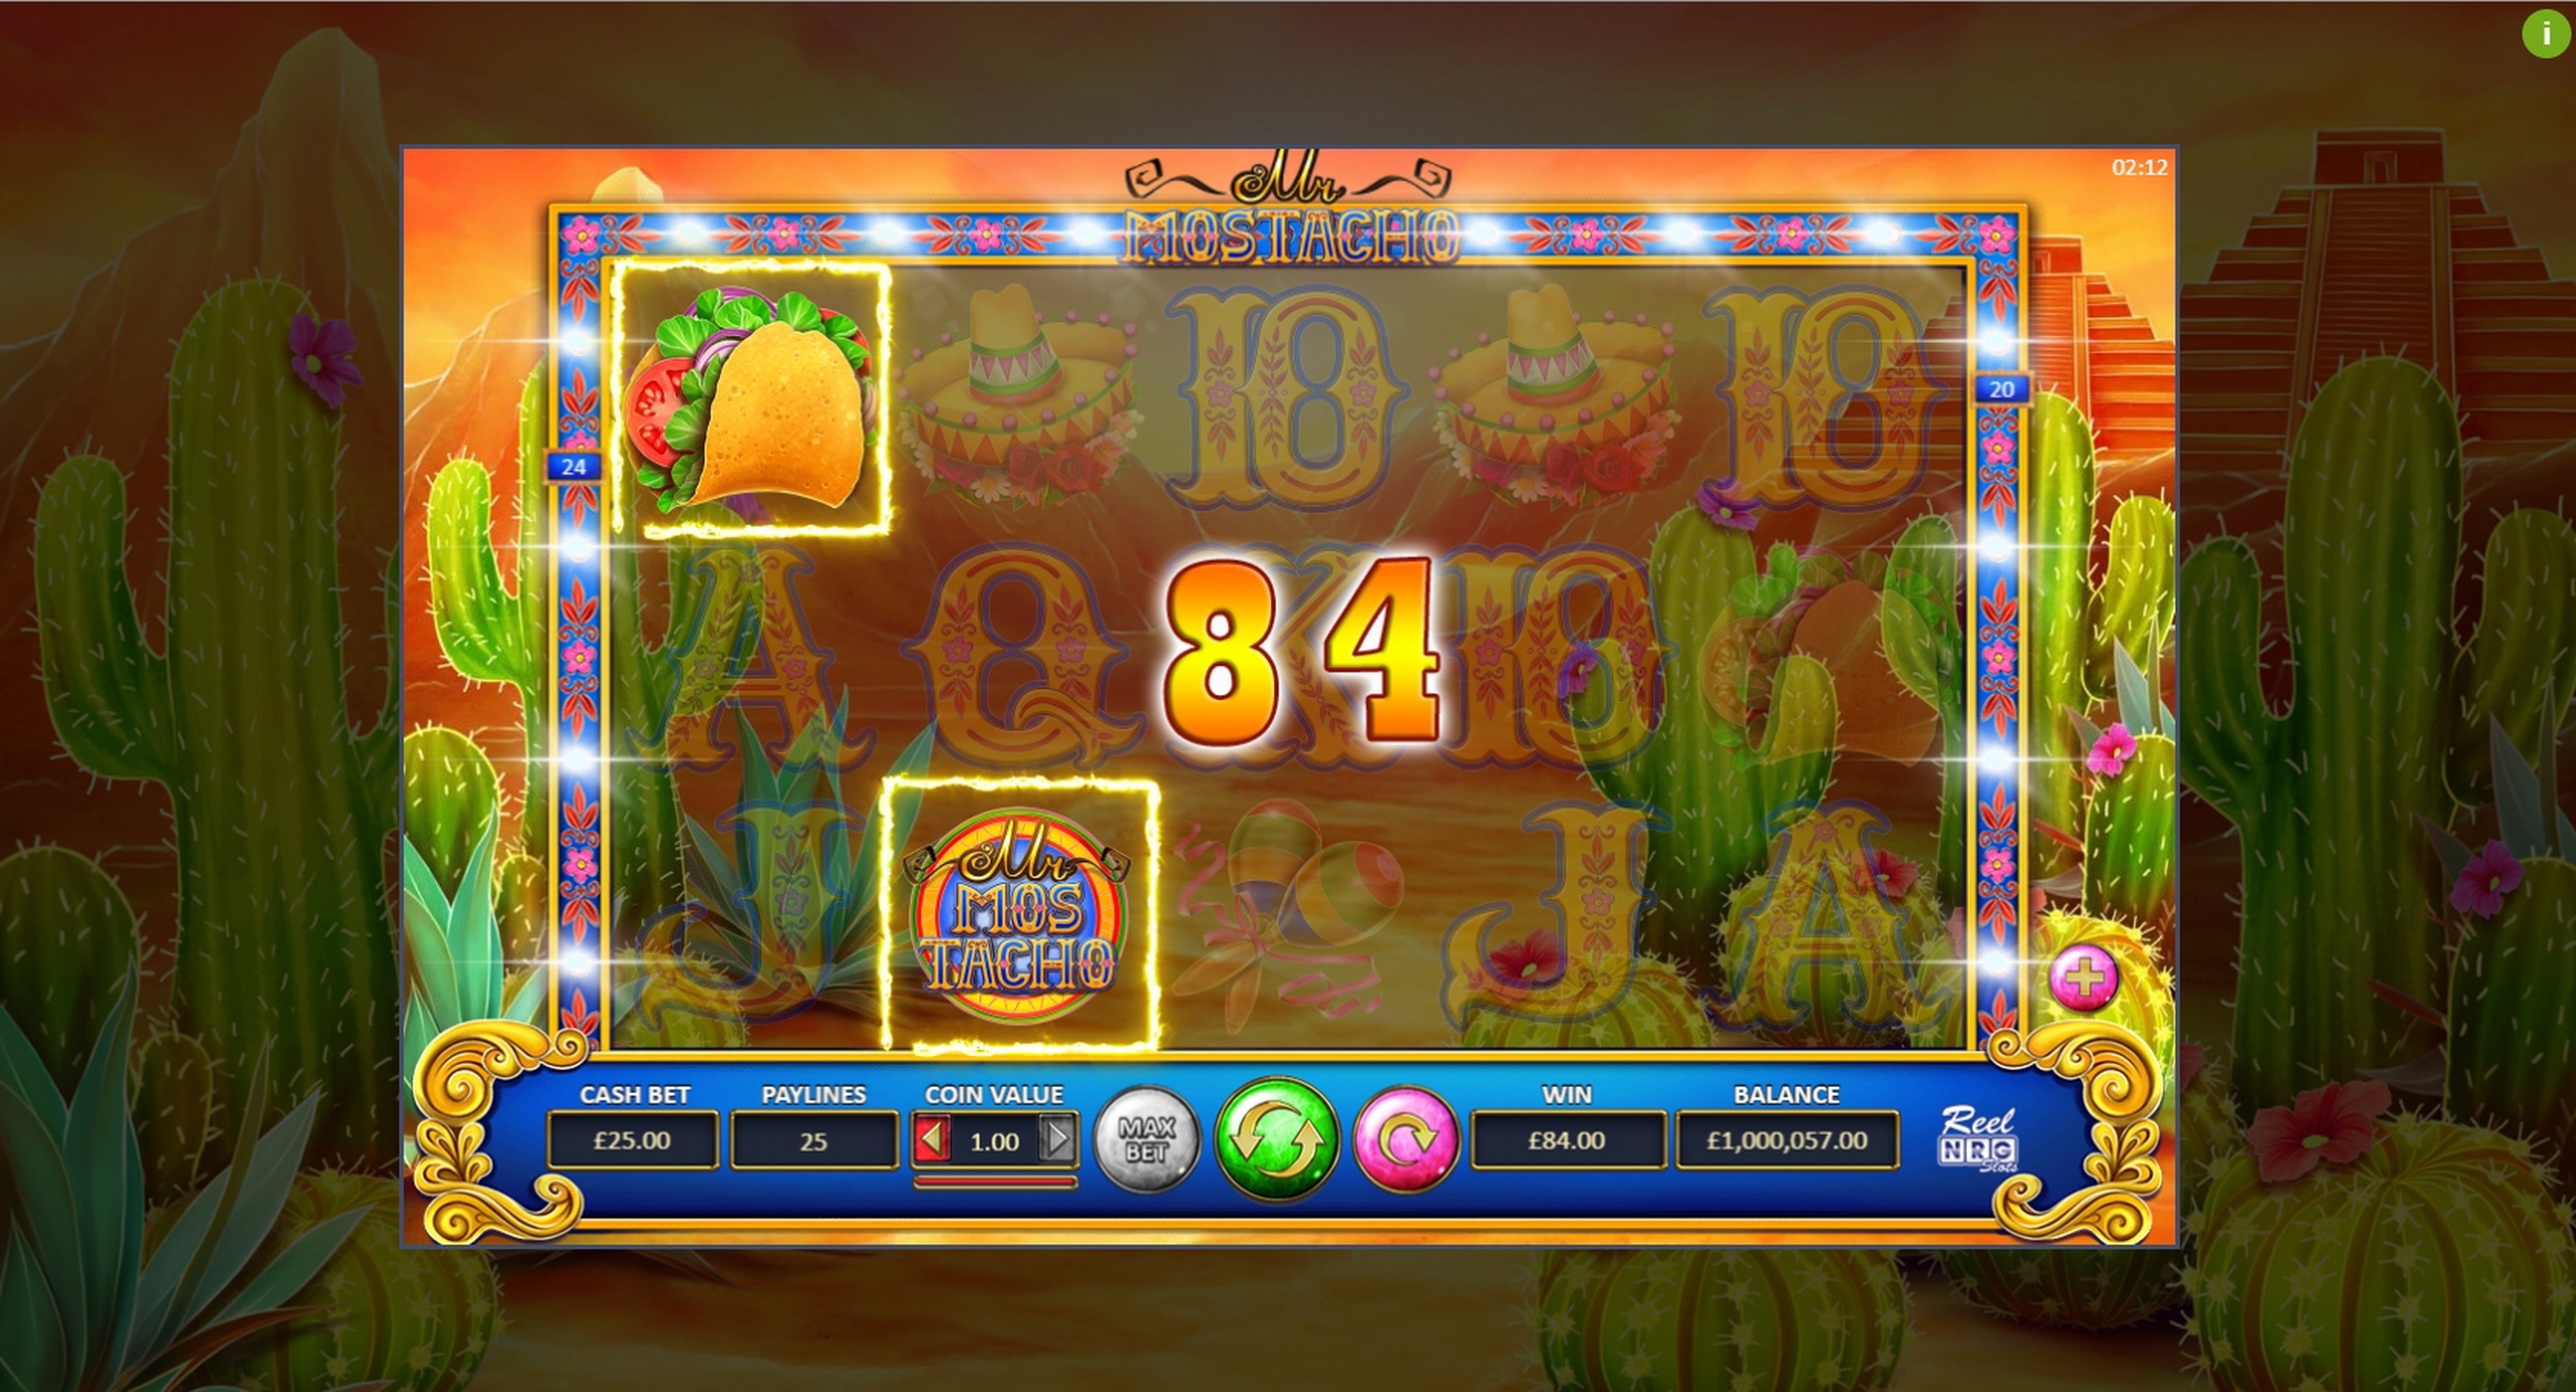 Win Money in Mr Mostacho Free Slot Game by ReelNRG Gaming